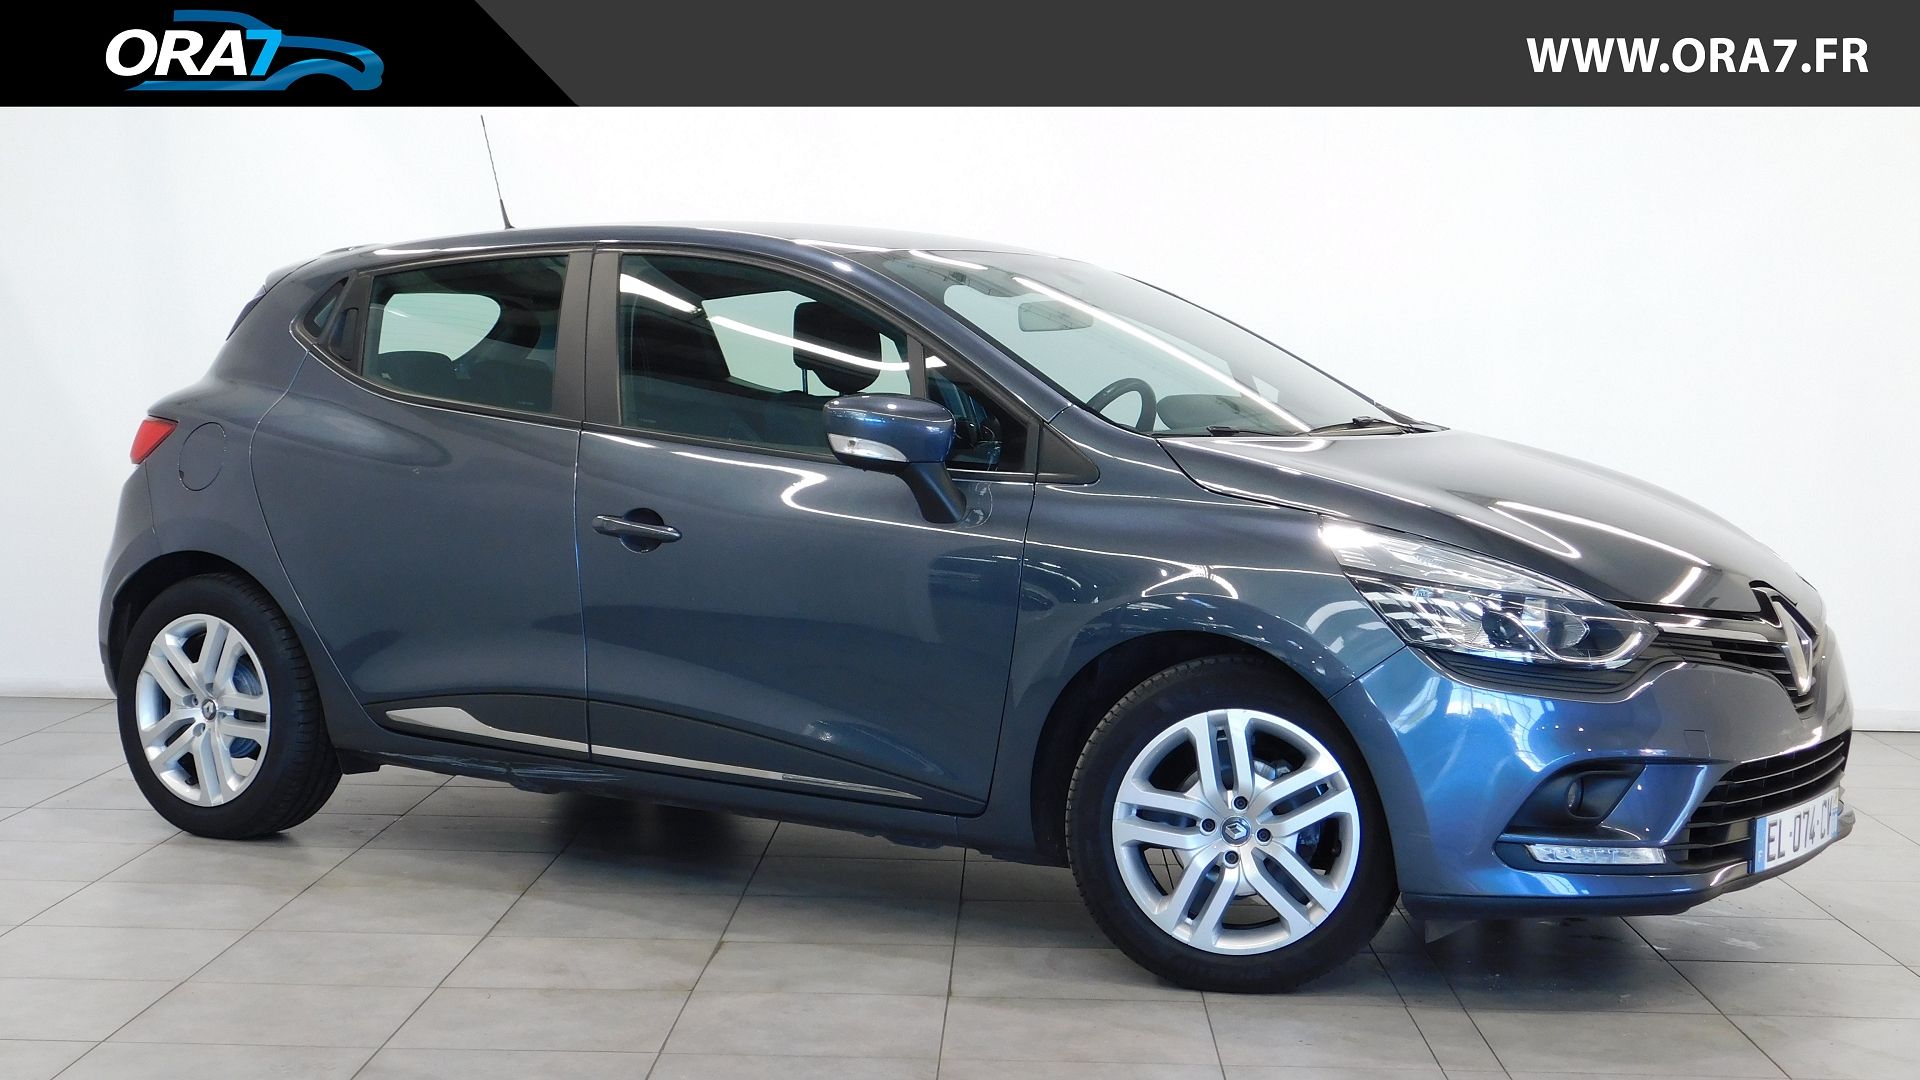 RENAULT CLIO 1.5 DCI 90CH ENERGY BUSINESS 82G 5P